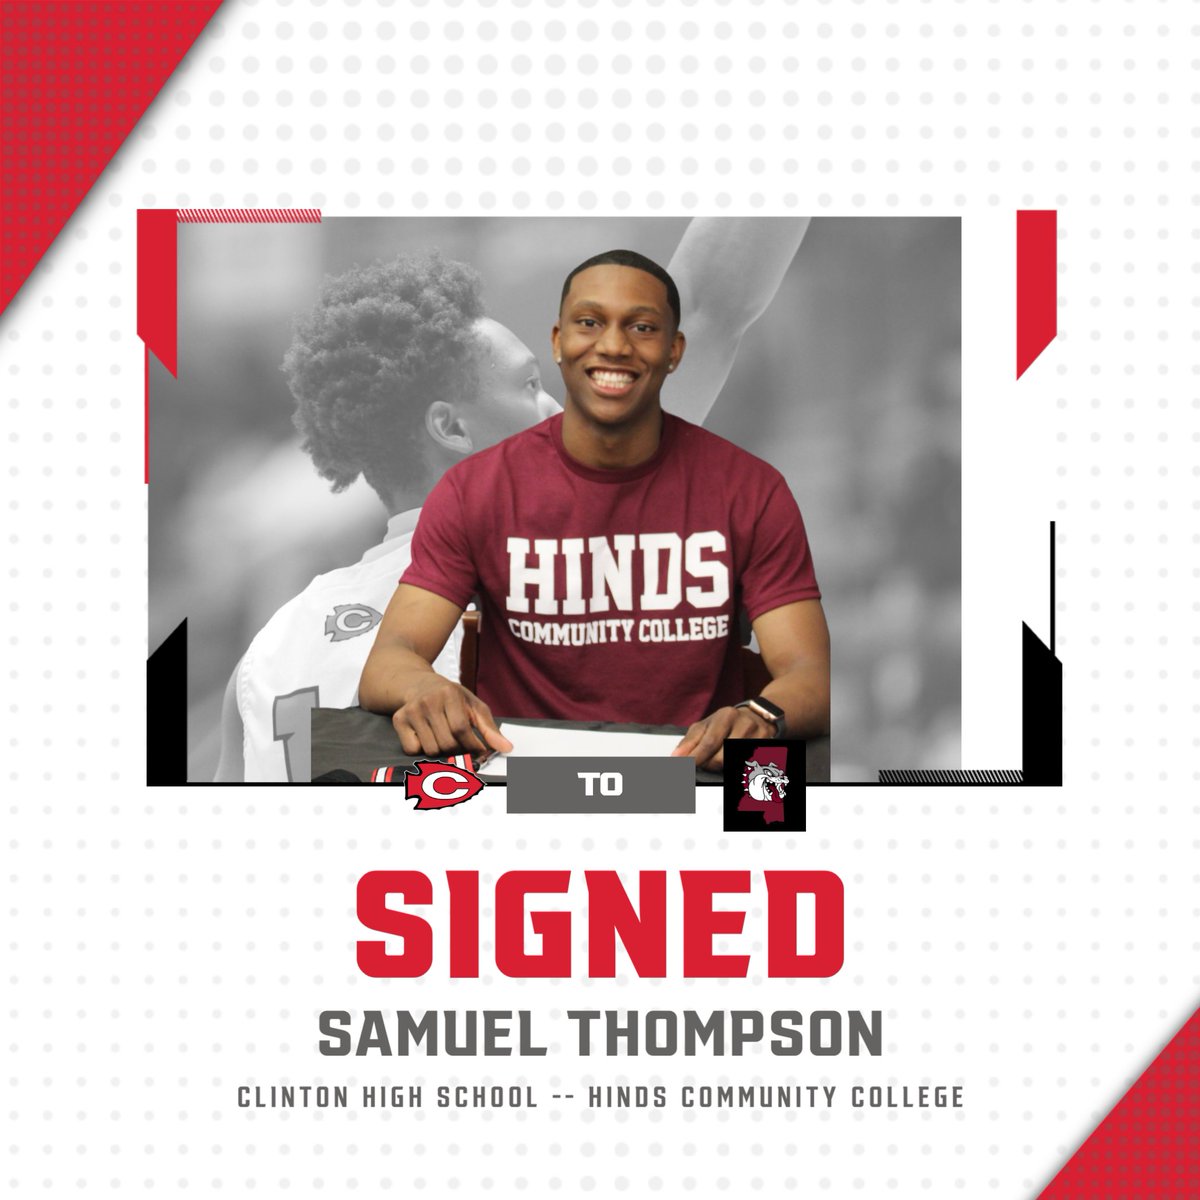 Yesterday afternoon, Senior Guard Samuel Thompson signed a National Letter of Intent to continue his career at Hinds Community College. We are so proud of Samuel's accomplishments and cannot wait to follow his success in the future. @ClintonSchools @ArrowBoysBB